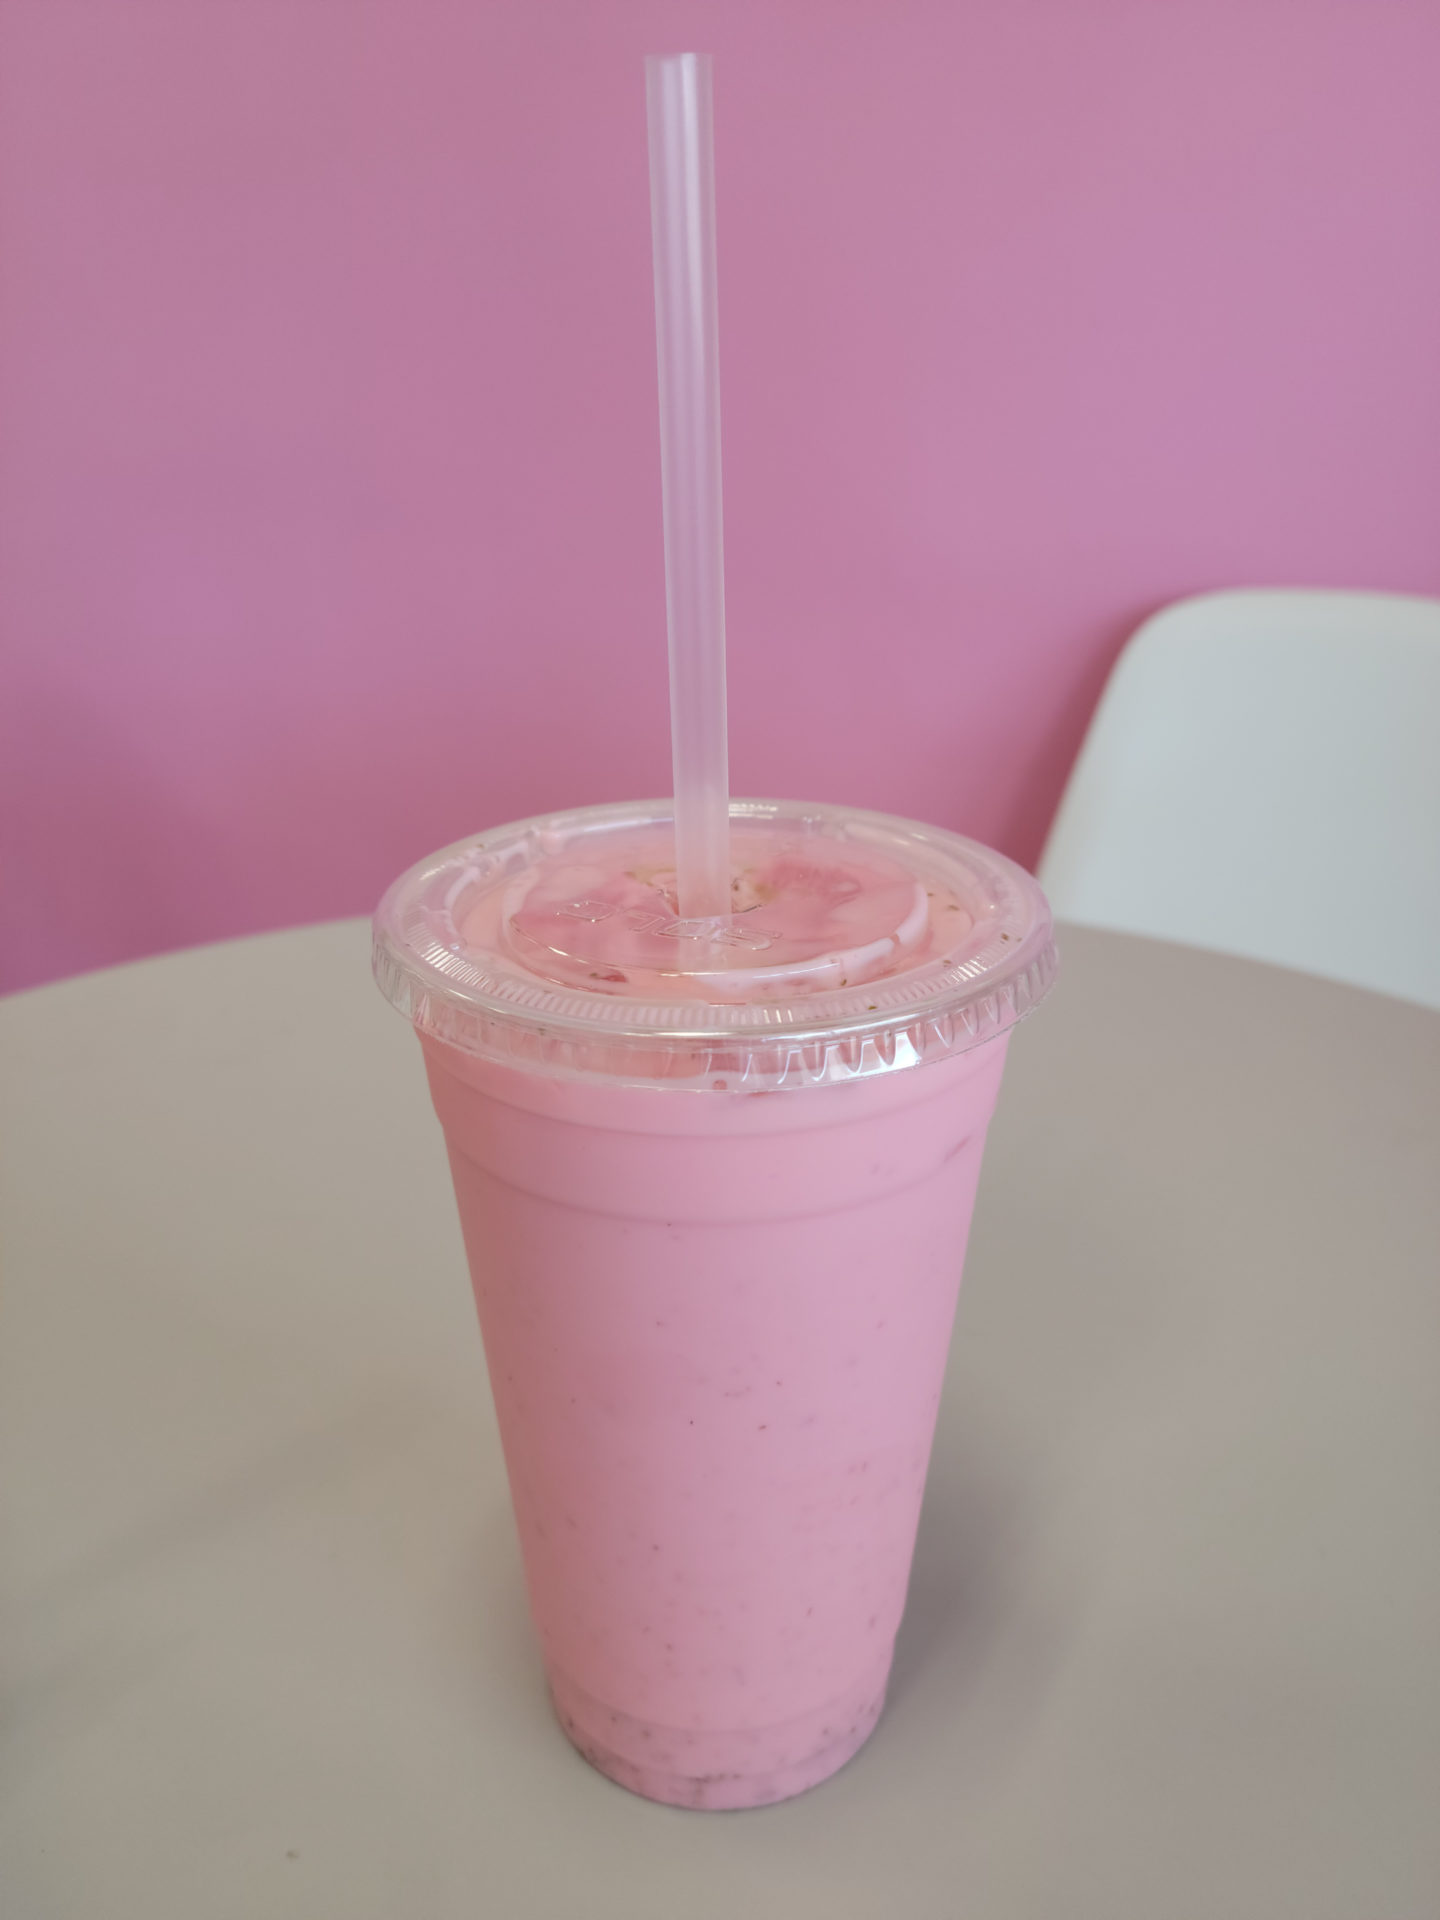 A medium plastic up of strawberry drink with a plastic straw. Photo by Matthew Macomber.